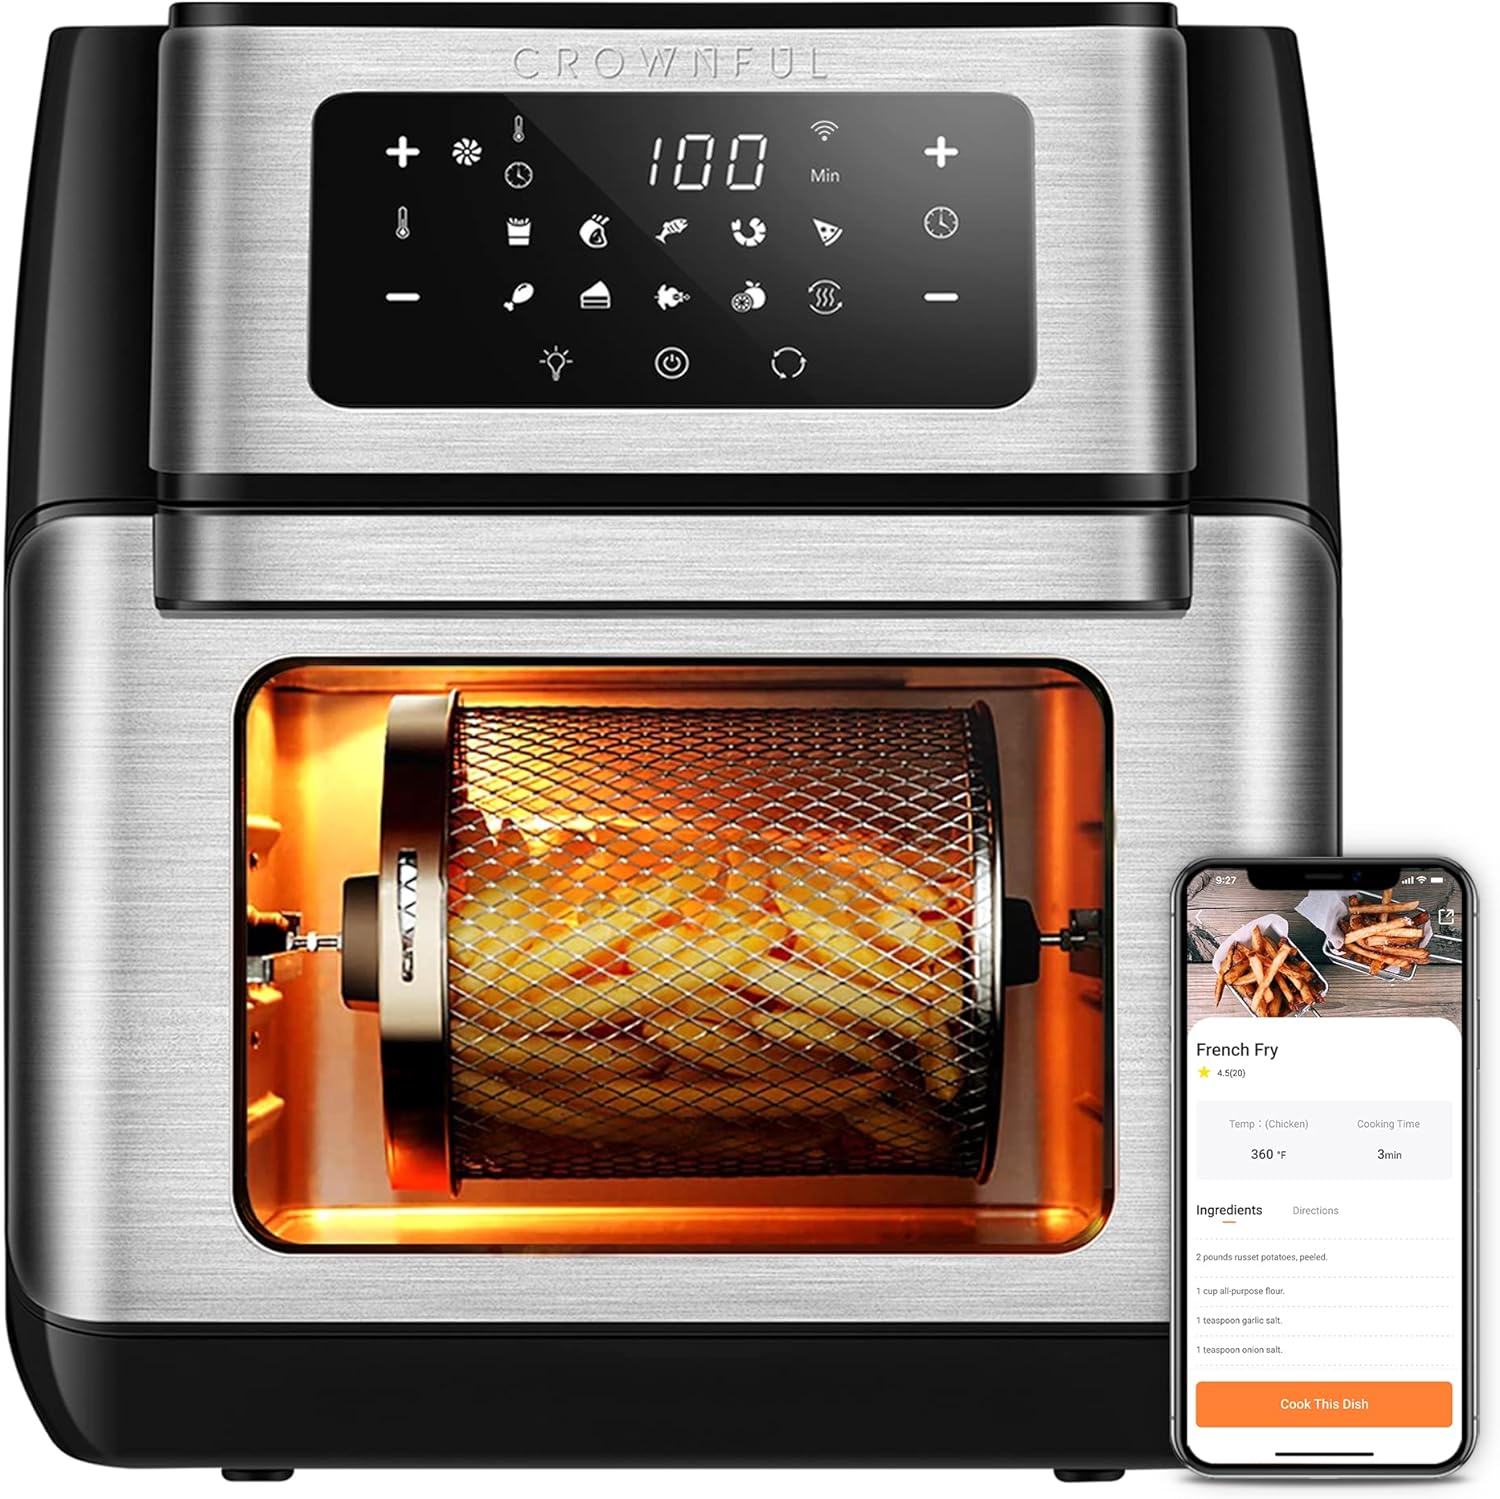 APEXCHASER Air Fryer Toaster Oven Combo 18-in-1 Functions - $85 · DISCOUNT  BROS